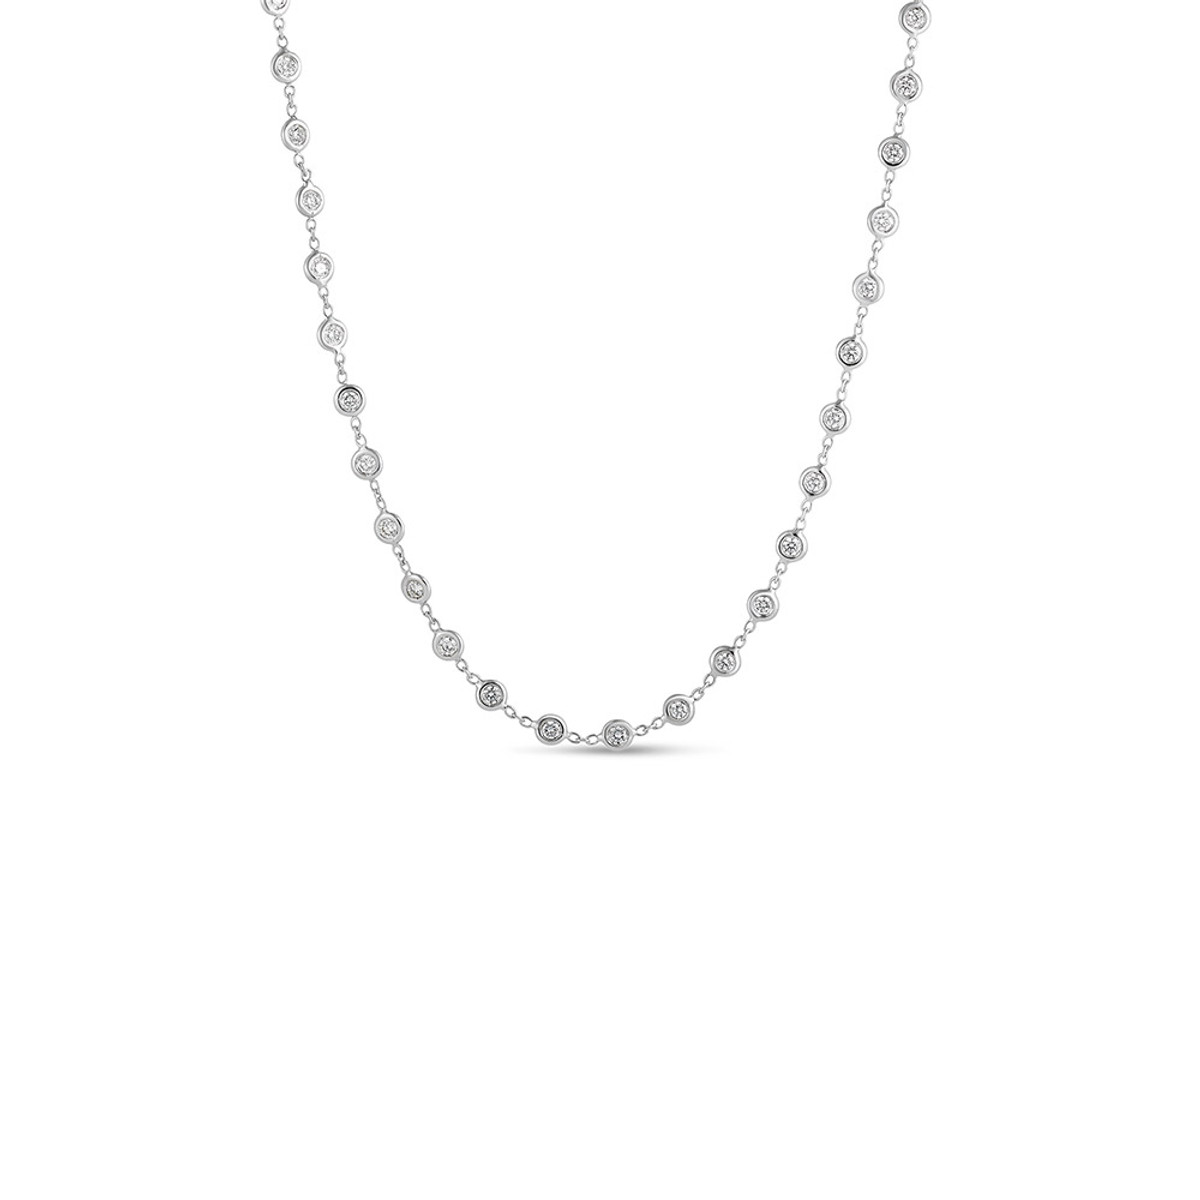 Roberto Coin 18K White Gold Diamond Station Necklace-48526 Product Image